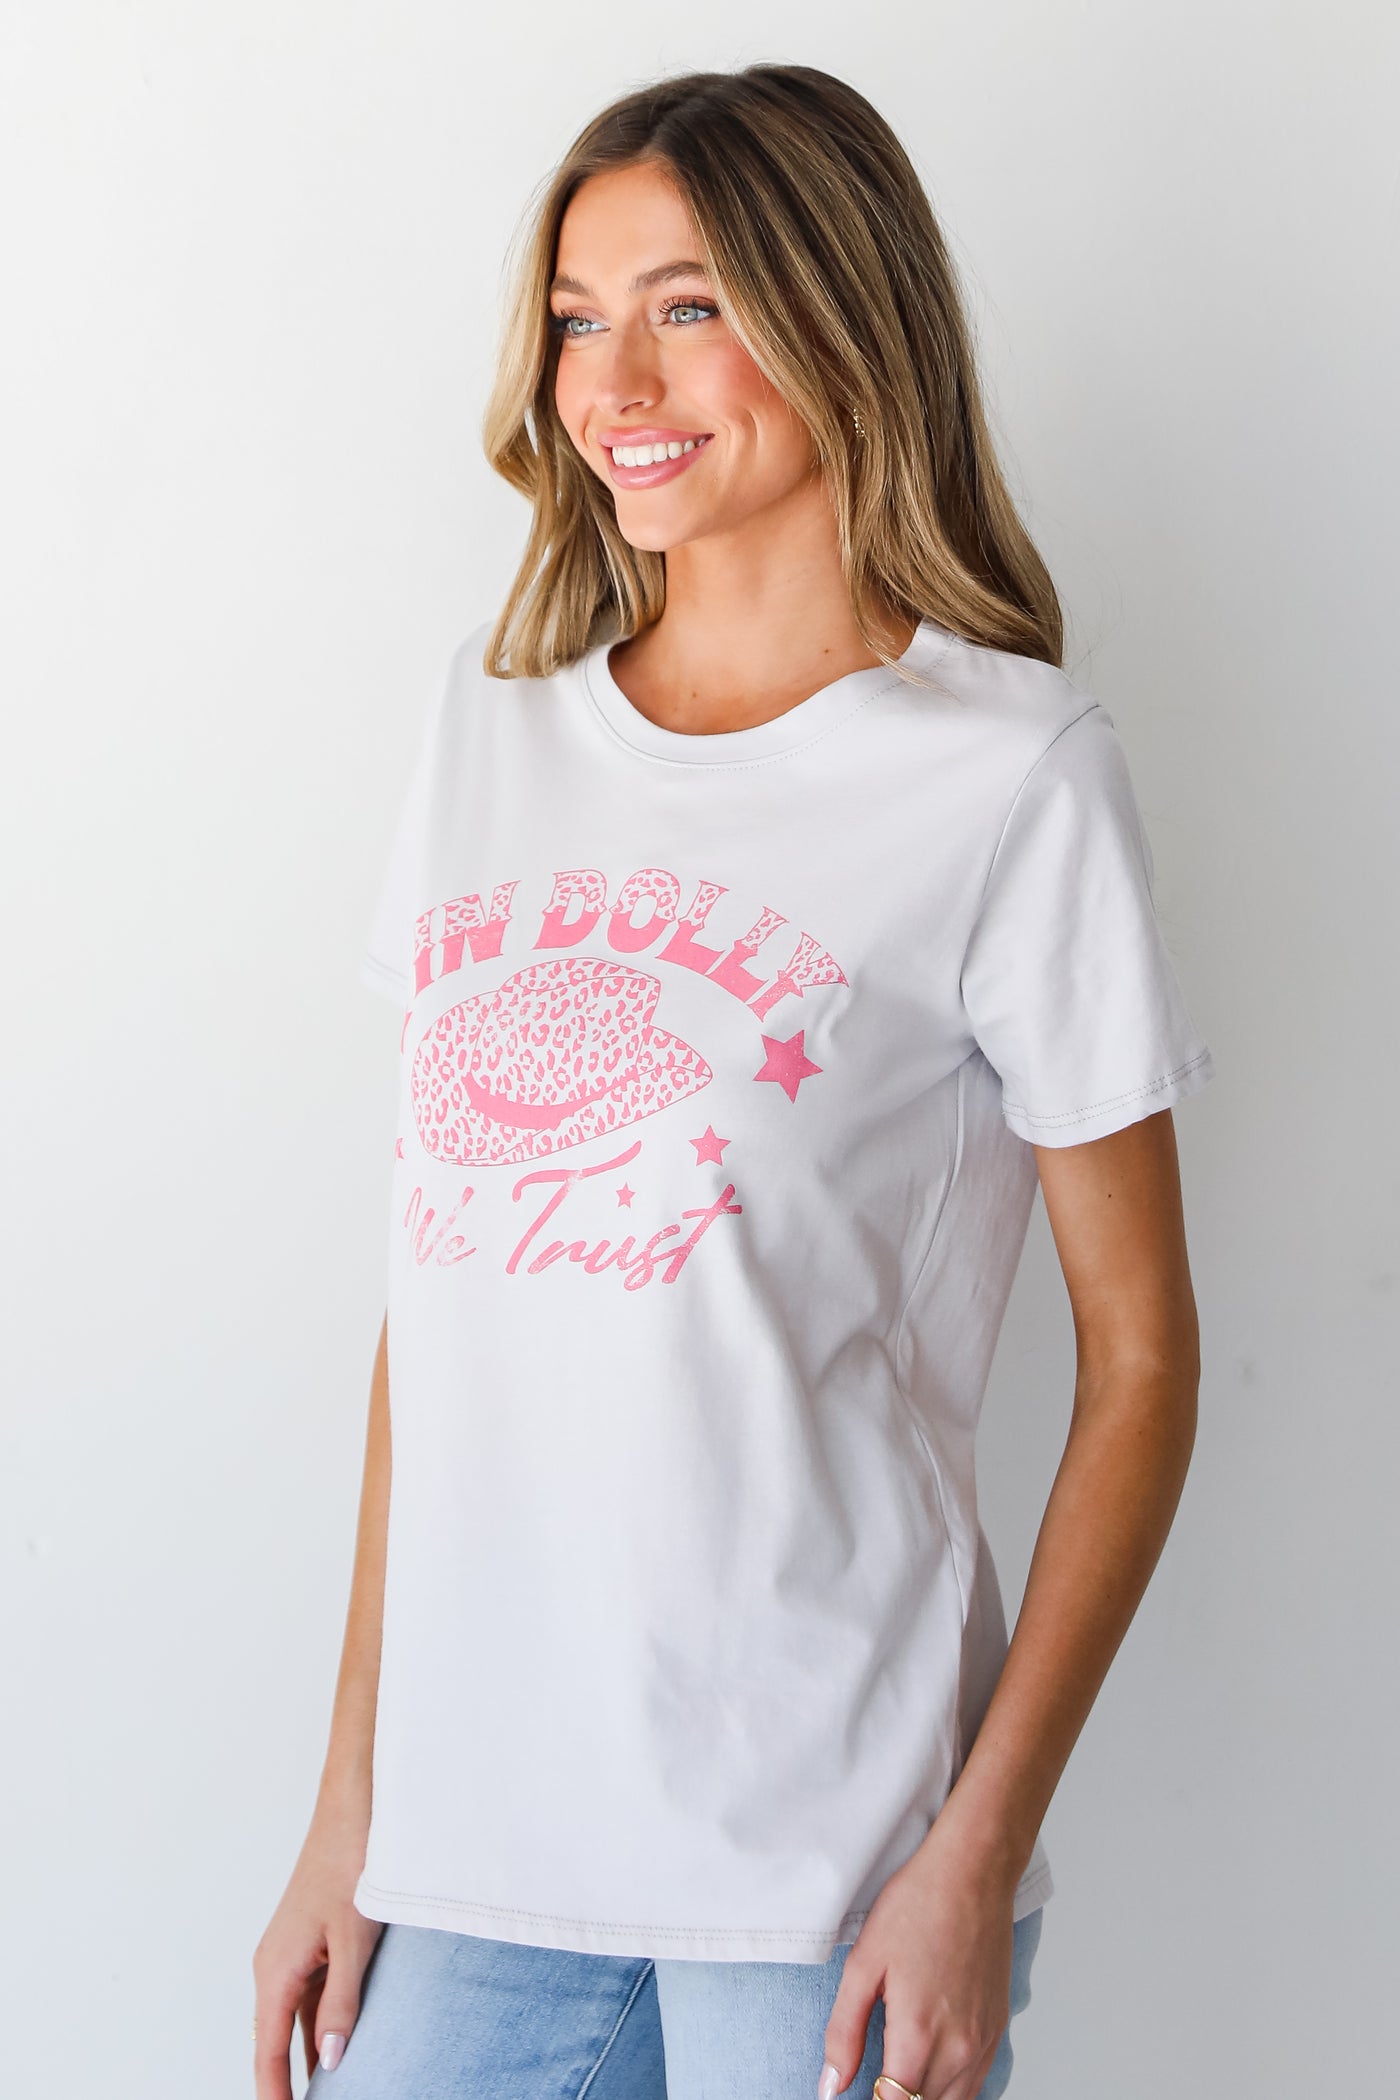 In Dolly We Trust Graphic Tee side view